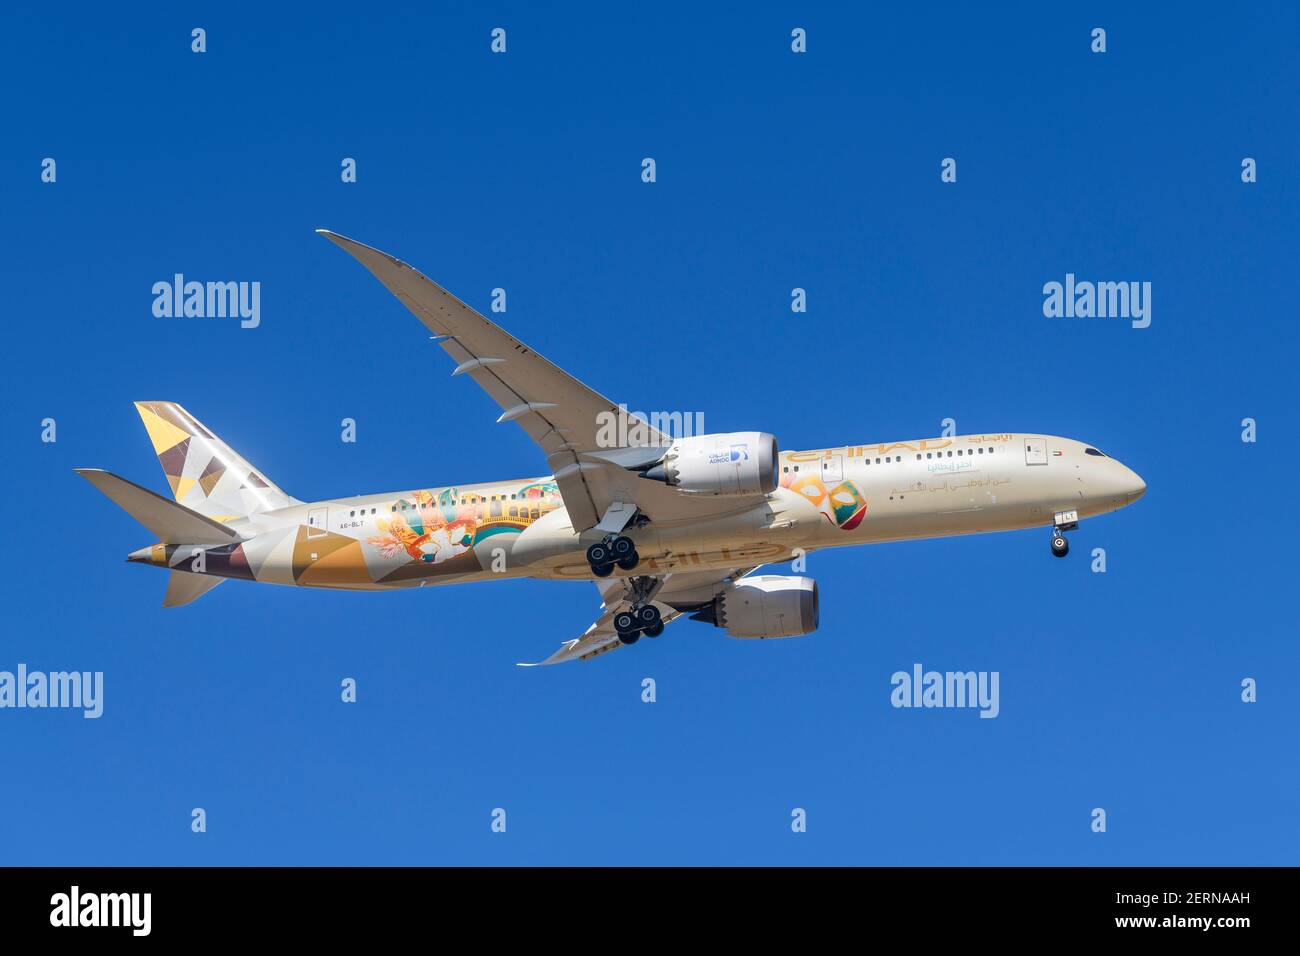 Munich, Germany - February 28. 2021: Etihad Airways Boeing 787-9 Dreamliner with the aircraft registration A6-BLT in the approach to the southern runw Stock Photo